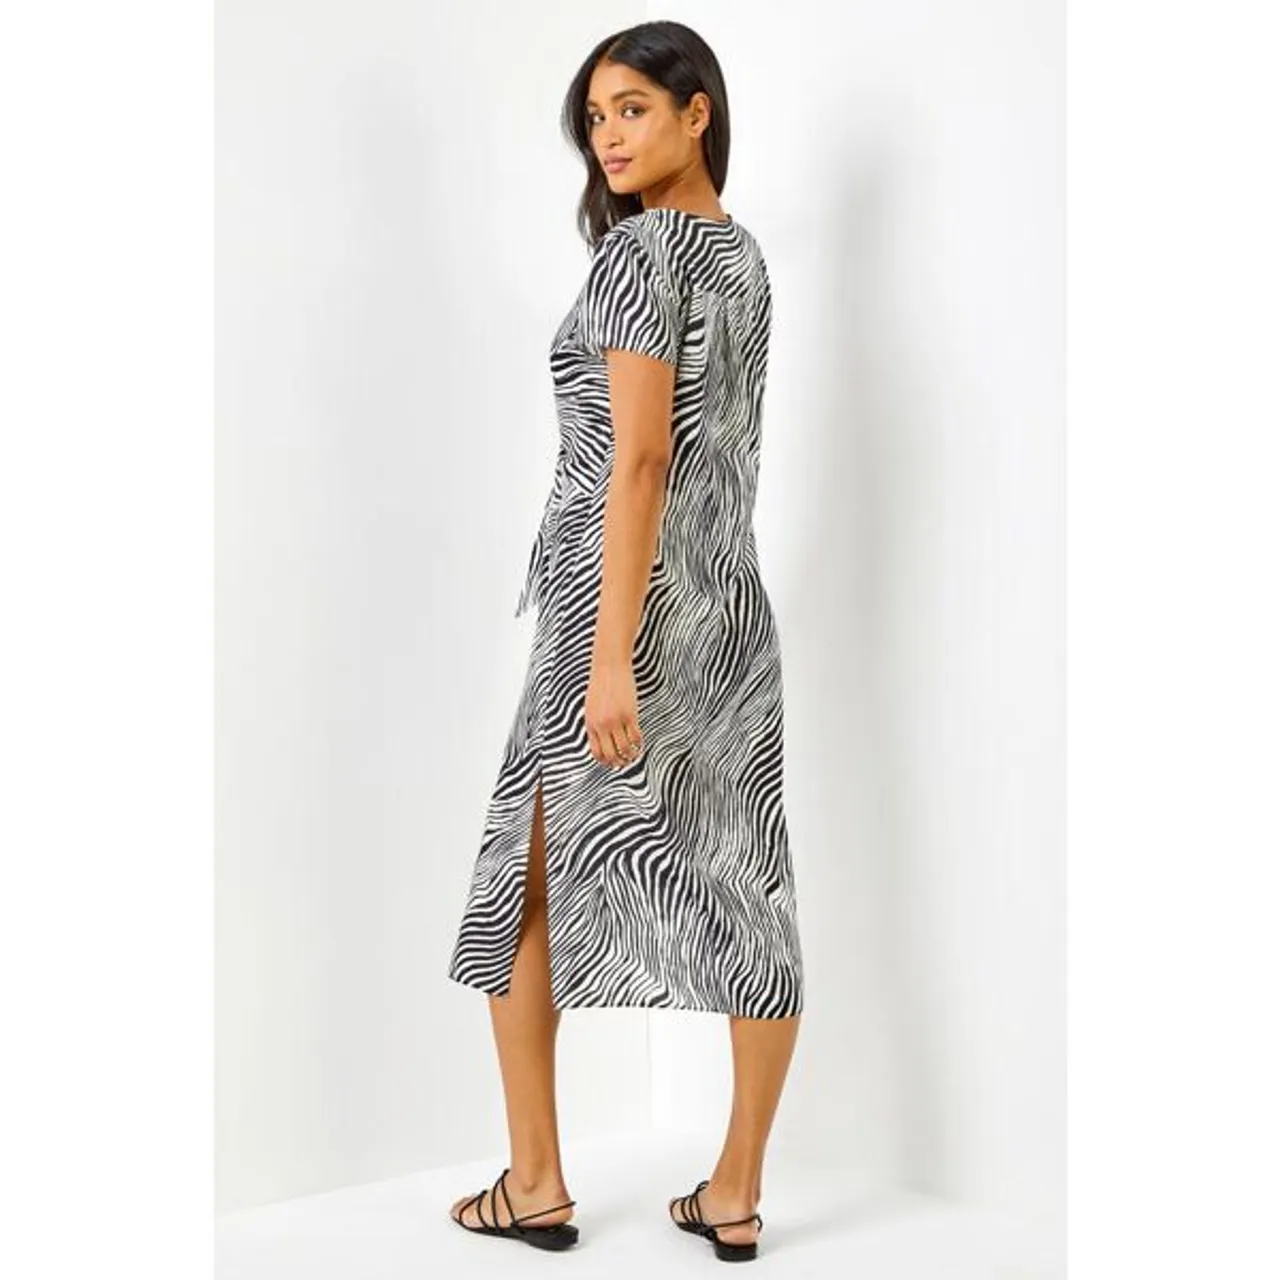 Roman Abstract Wave Print Tie Knot Detail Dress in Black 20 female